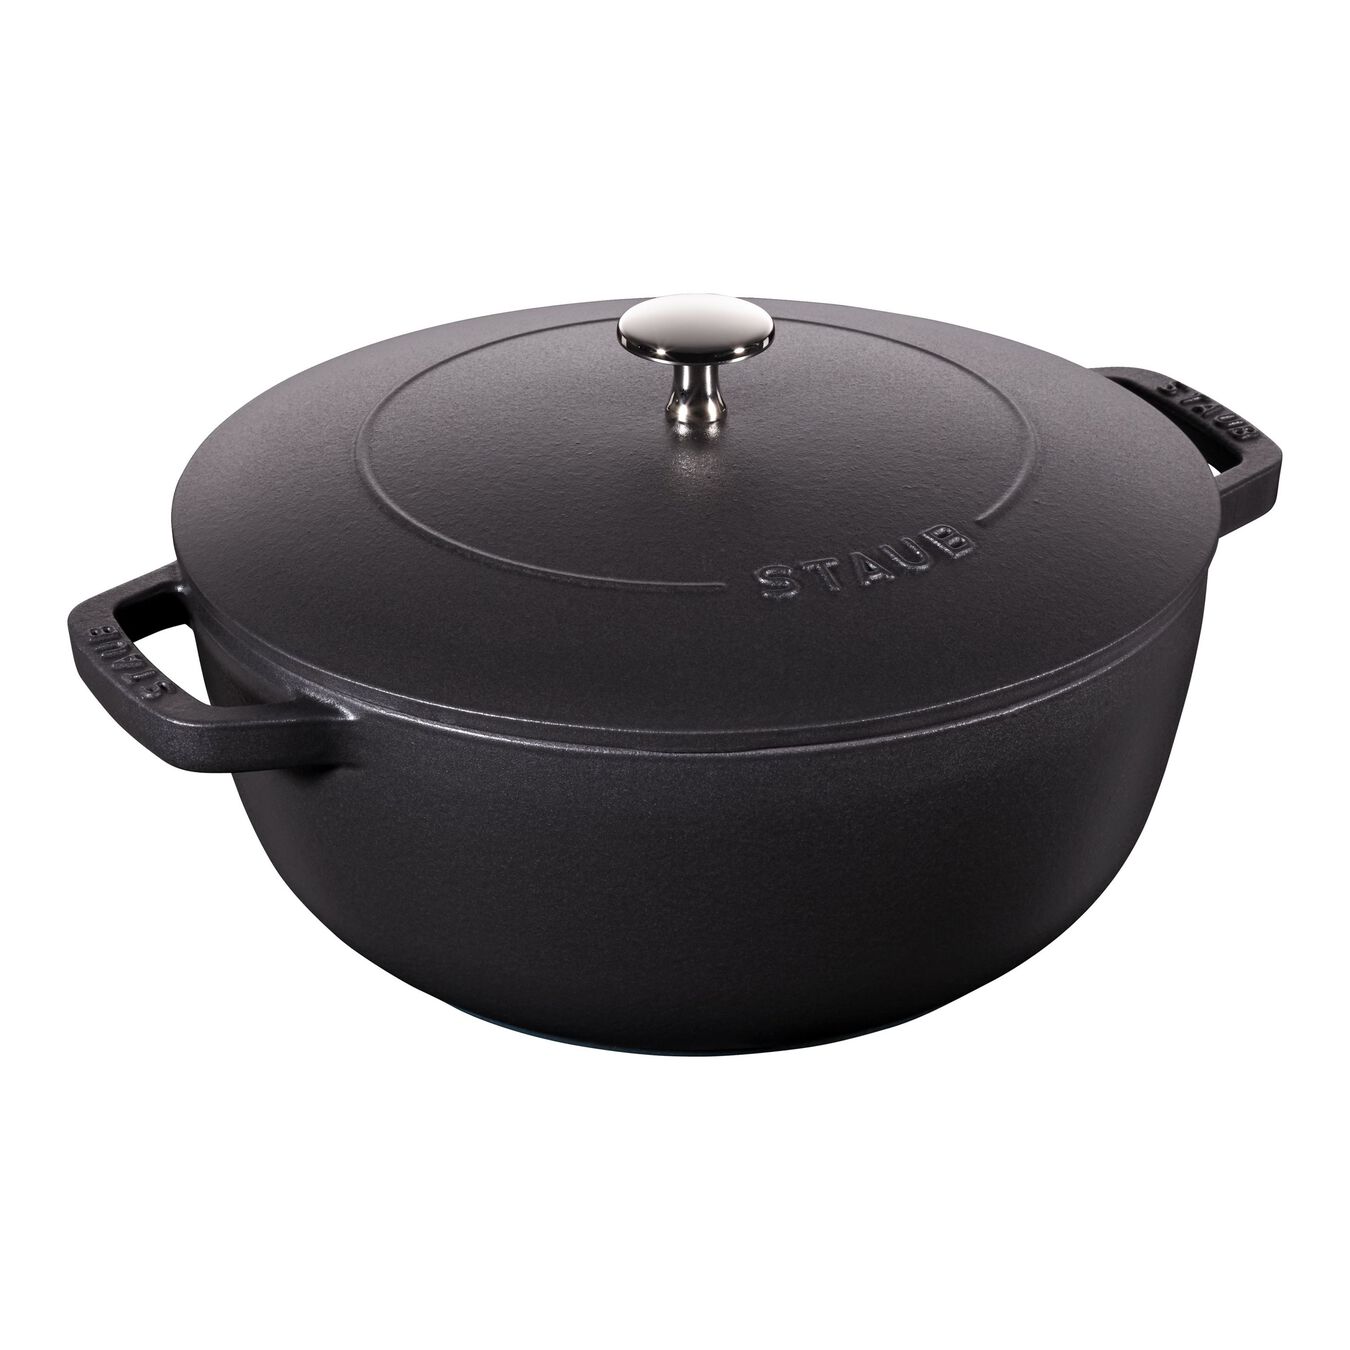 3.6 l cast iron round French oven, black,,large 1